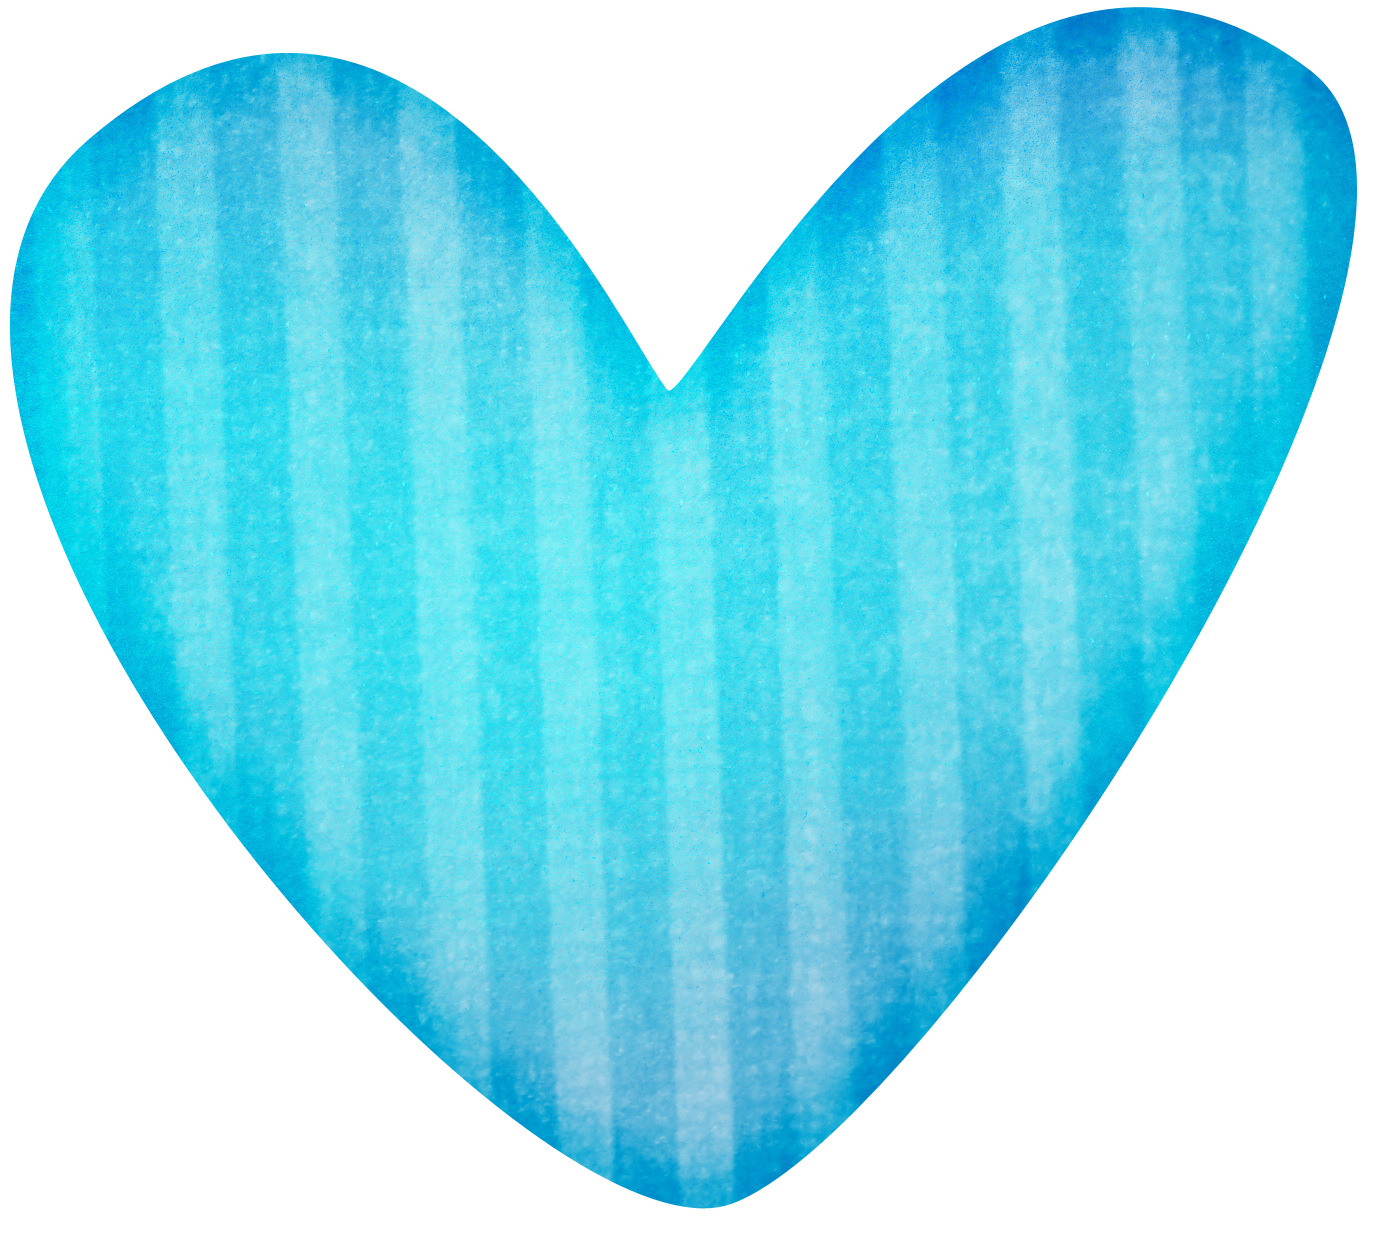 Blue Heart Clipart - Free Clipart Images